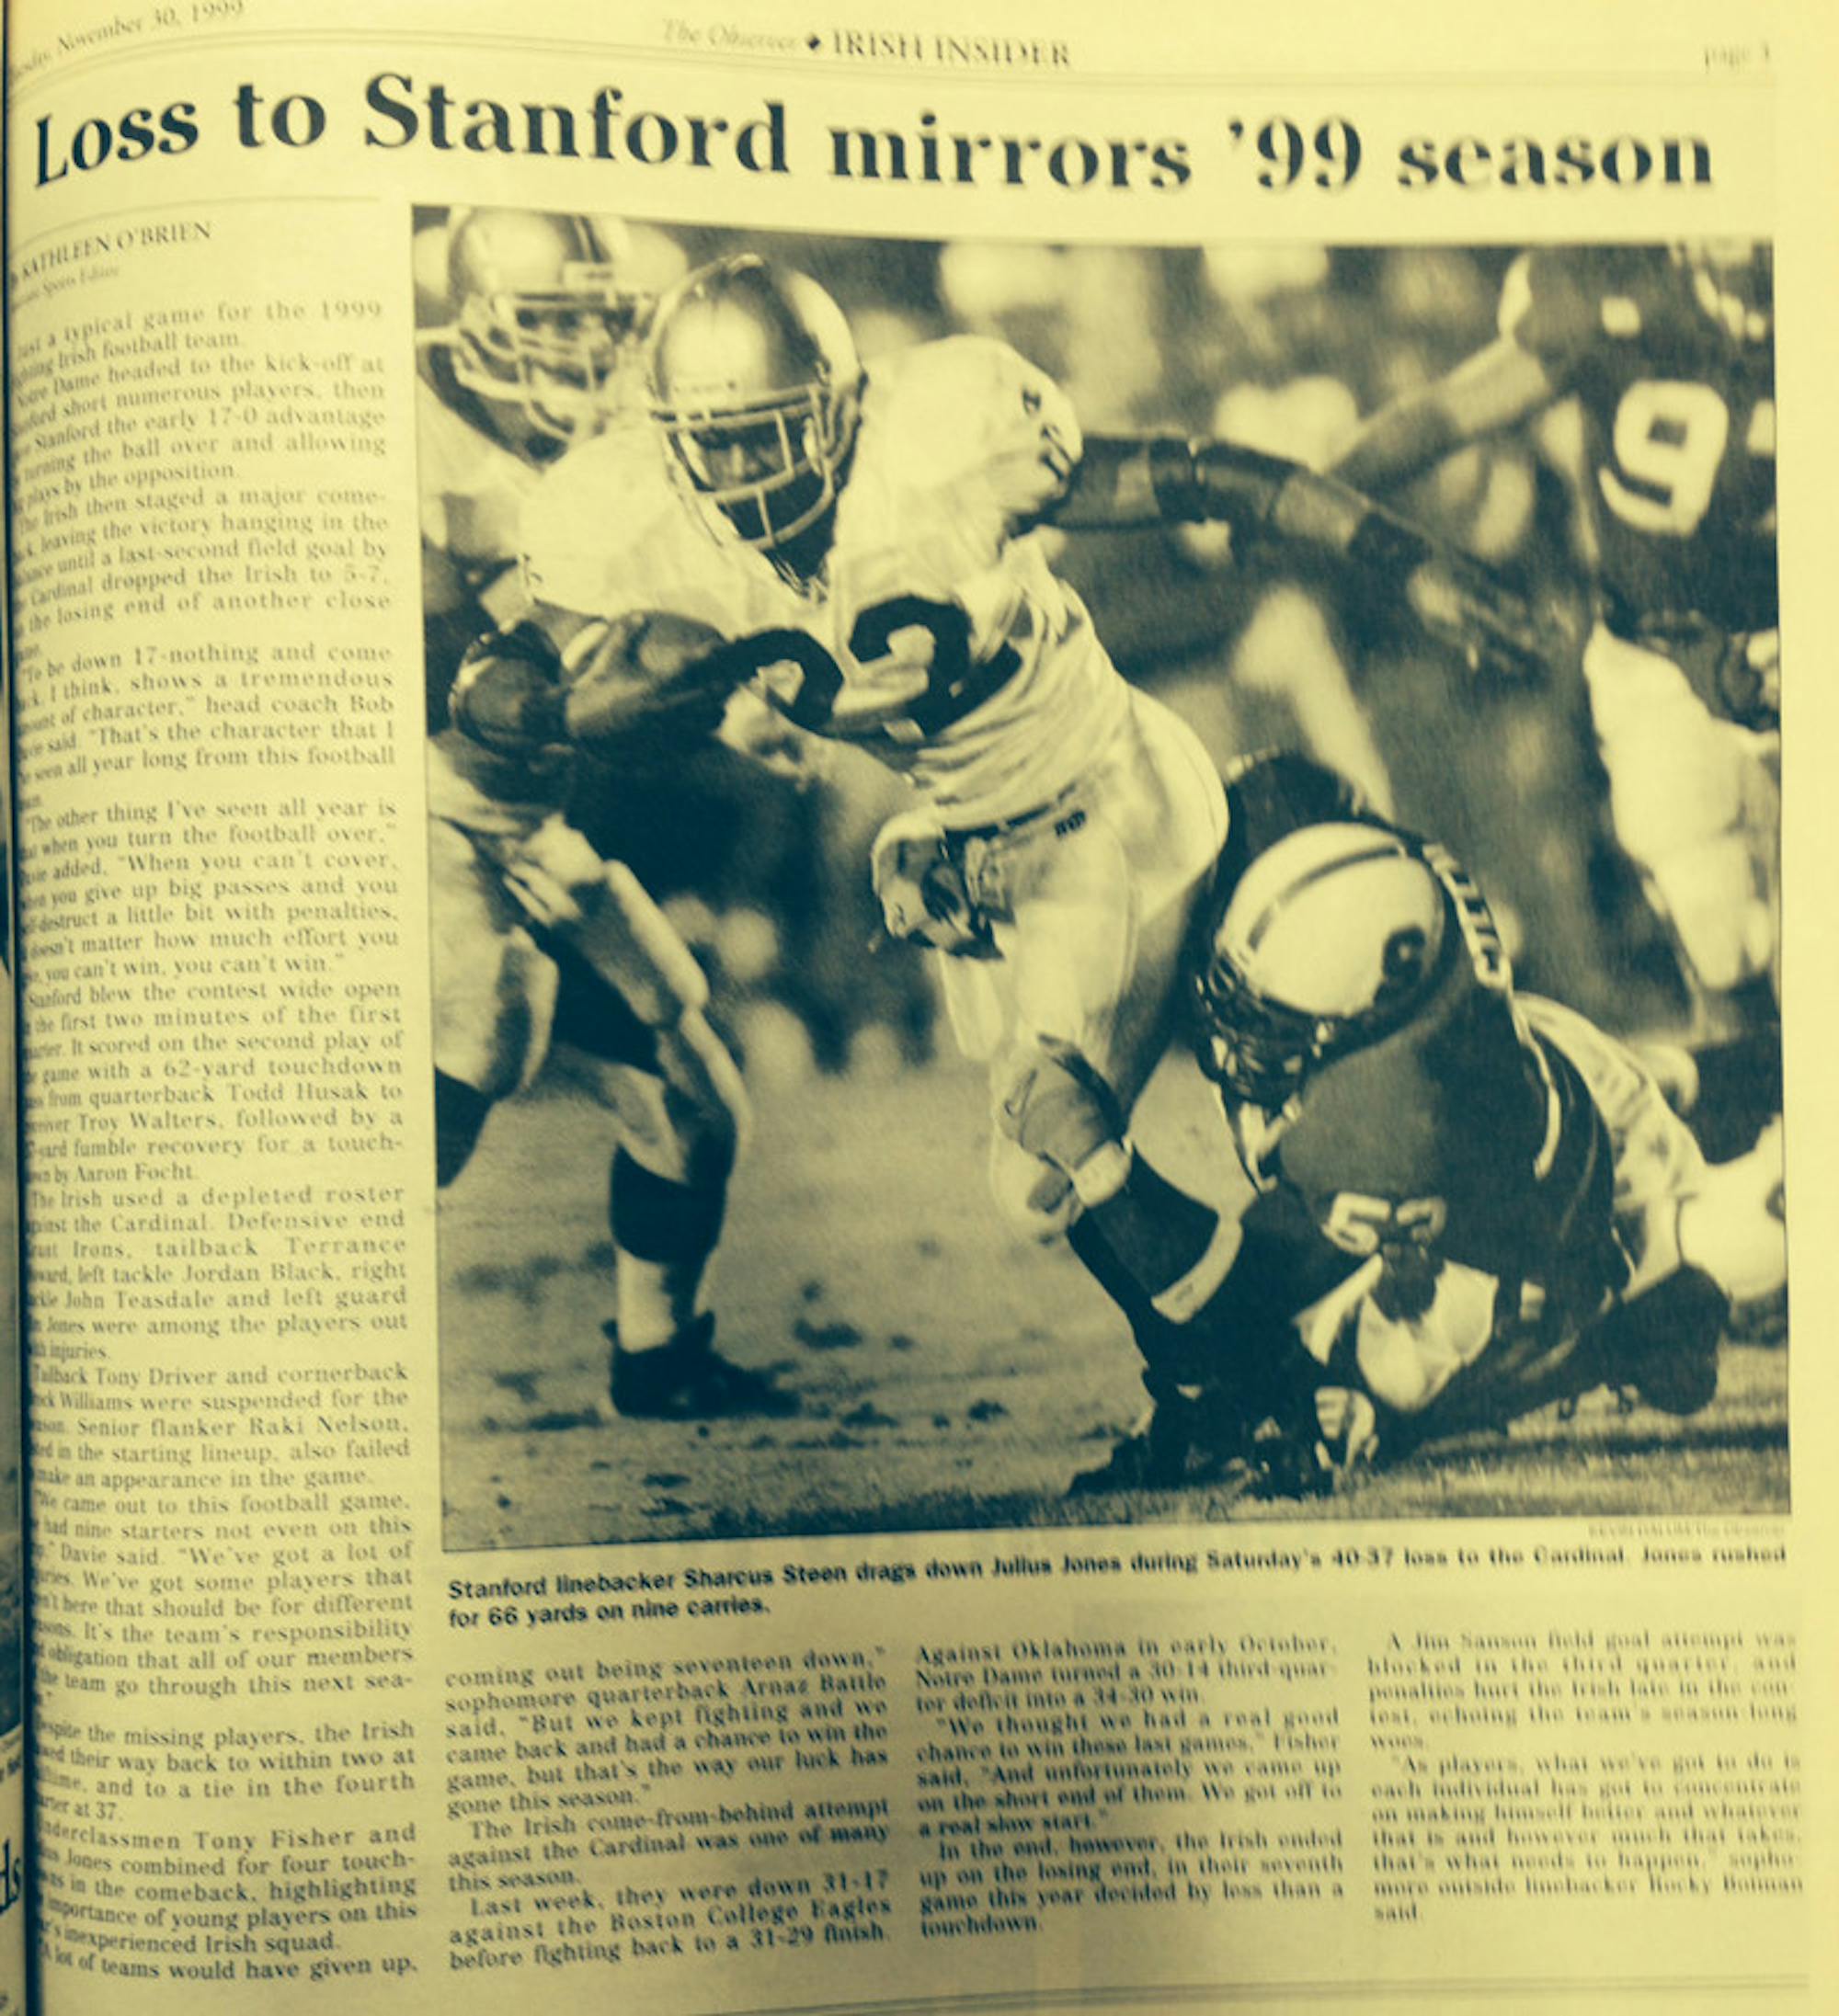 The Observer from Nov. 30, 1999.